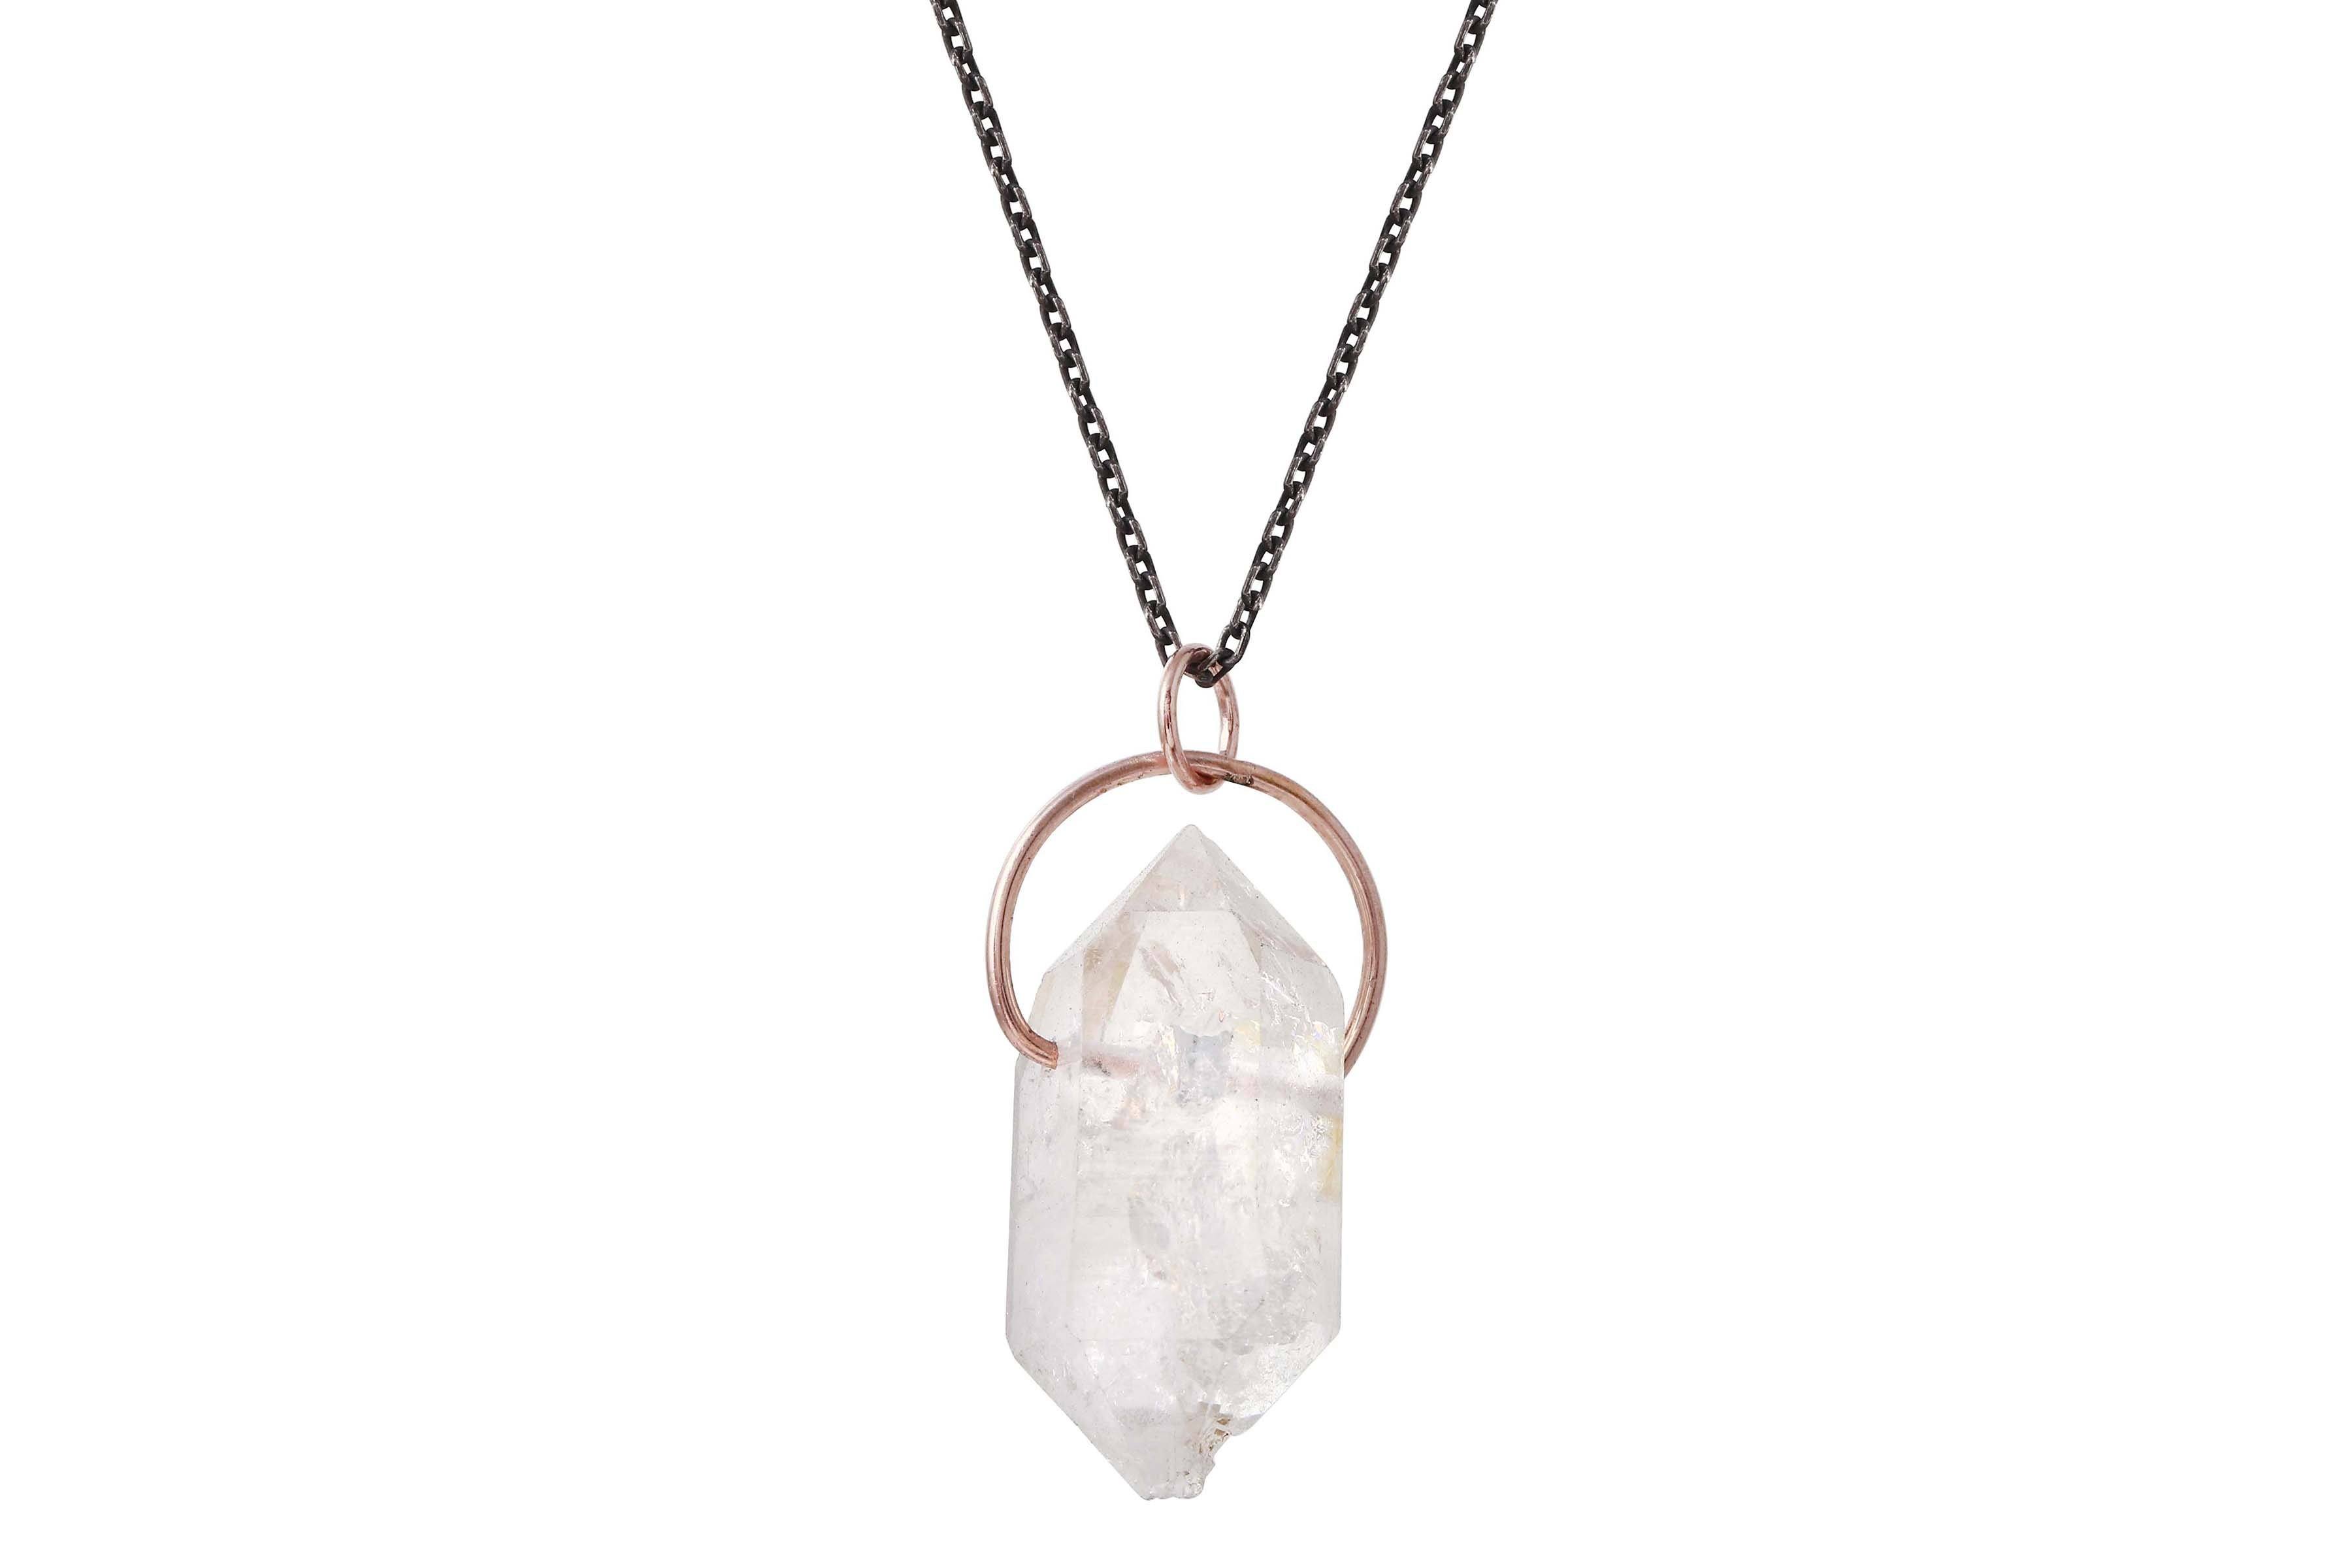 Rock crystal necklace with bronze beads | Susan Forde Jewellery NZ